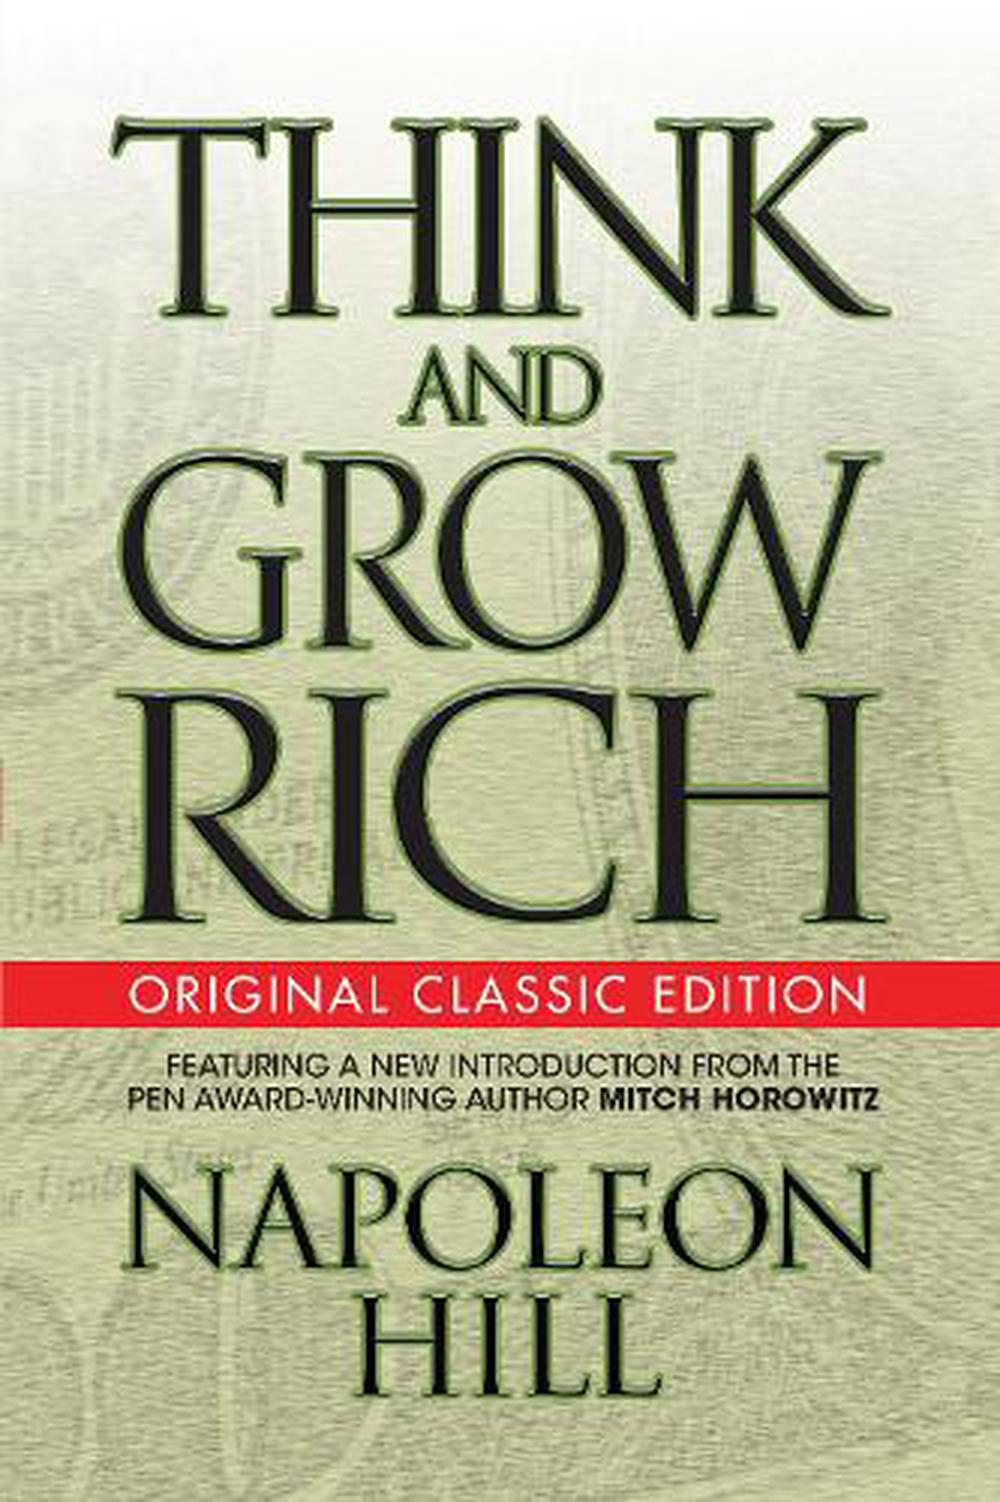 think and grow rich book report